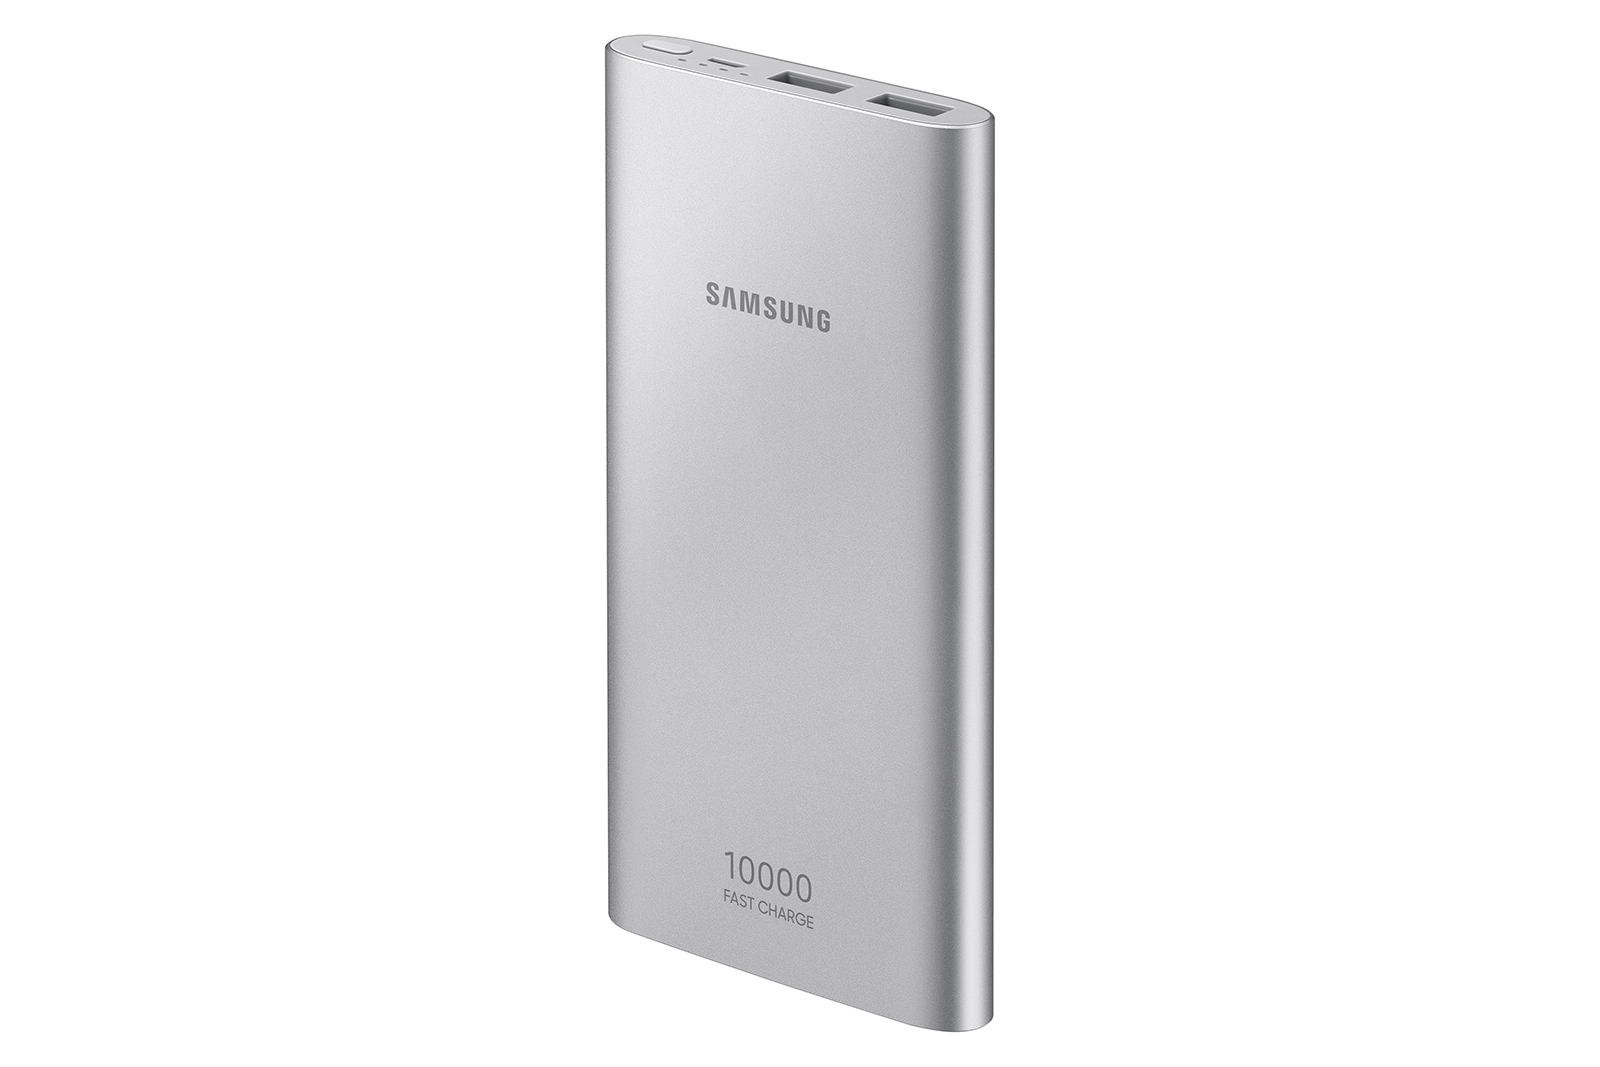 Thumbnail image of 10,000 mAh Portable Battery with Micro USB Cable, Silver